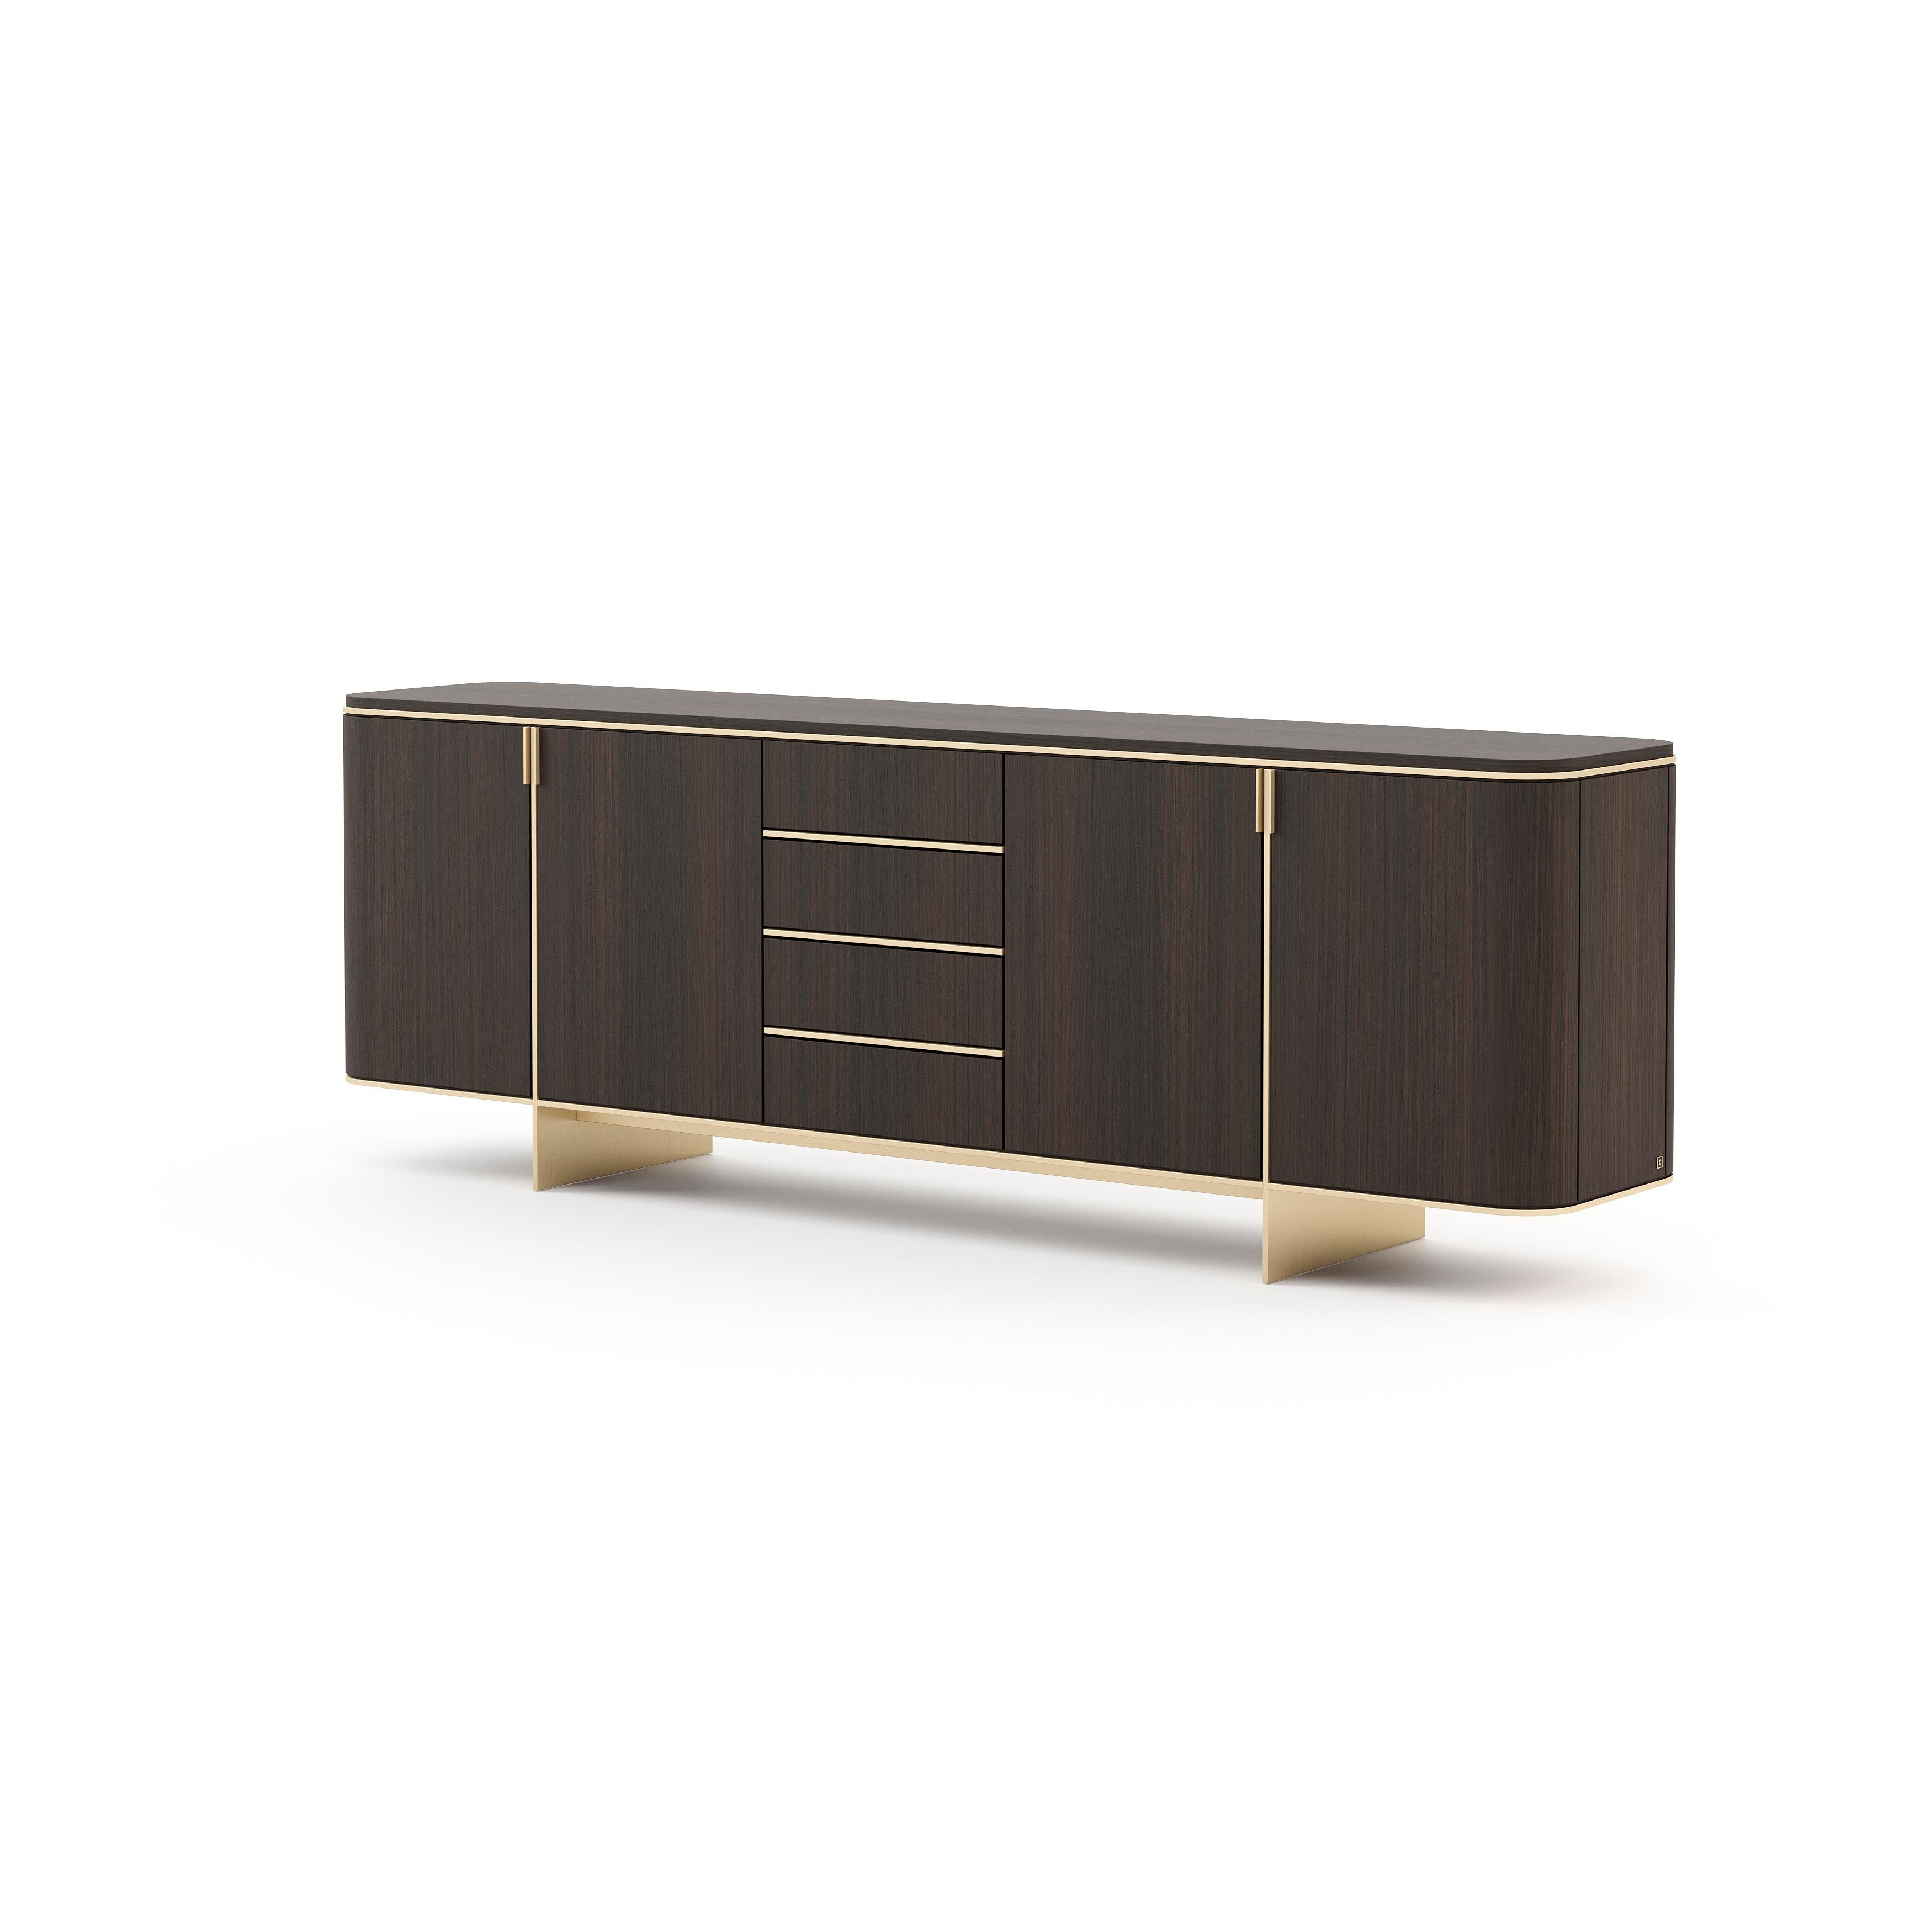 Dean sideboard strong textures and patterns are echos of the distinguishing beauty that defines Mid-Century Modern furniture designs. Carved in Laskasas workshops, this storage piece transforms spaces and settles interior design concepts. Made in